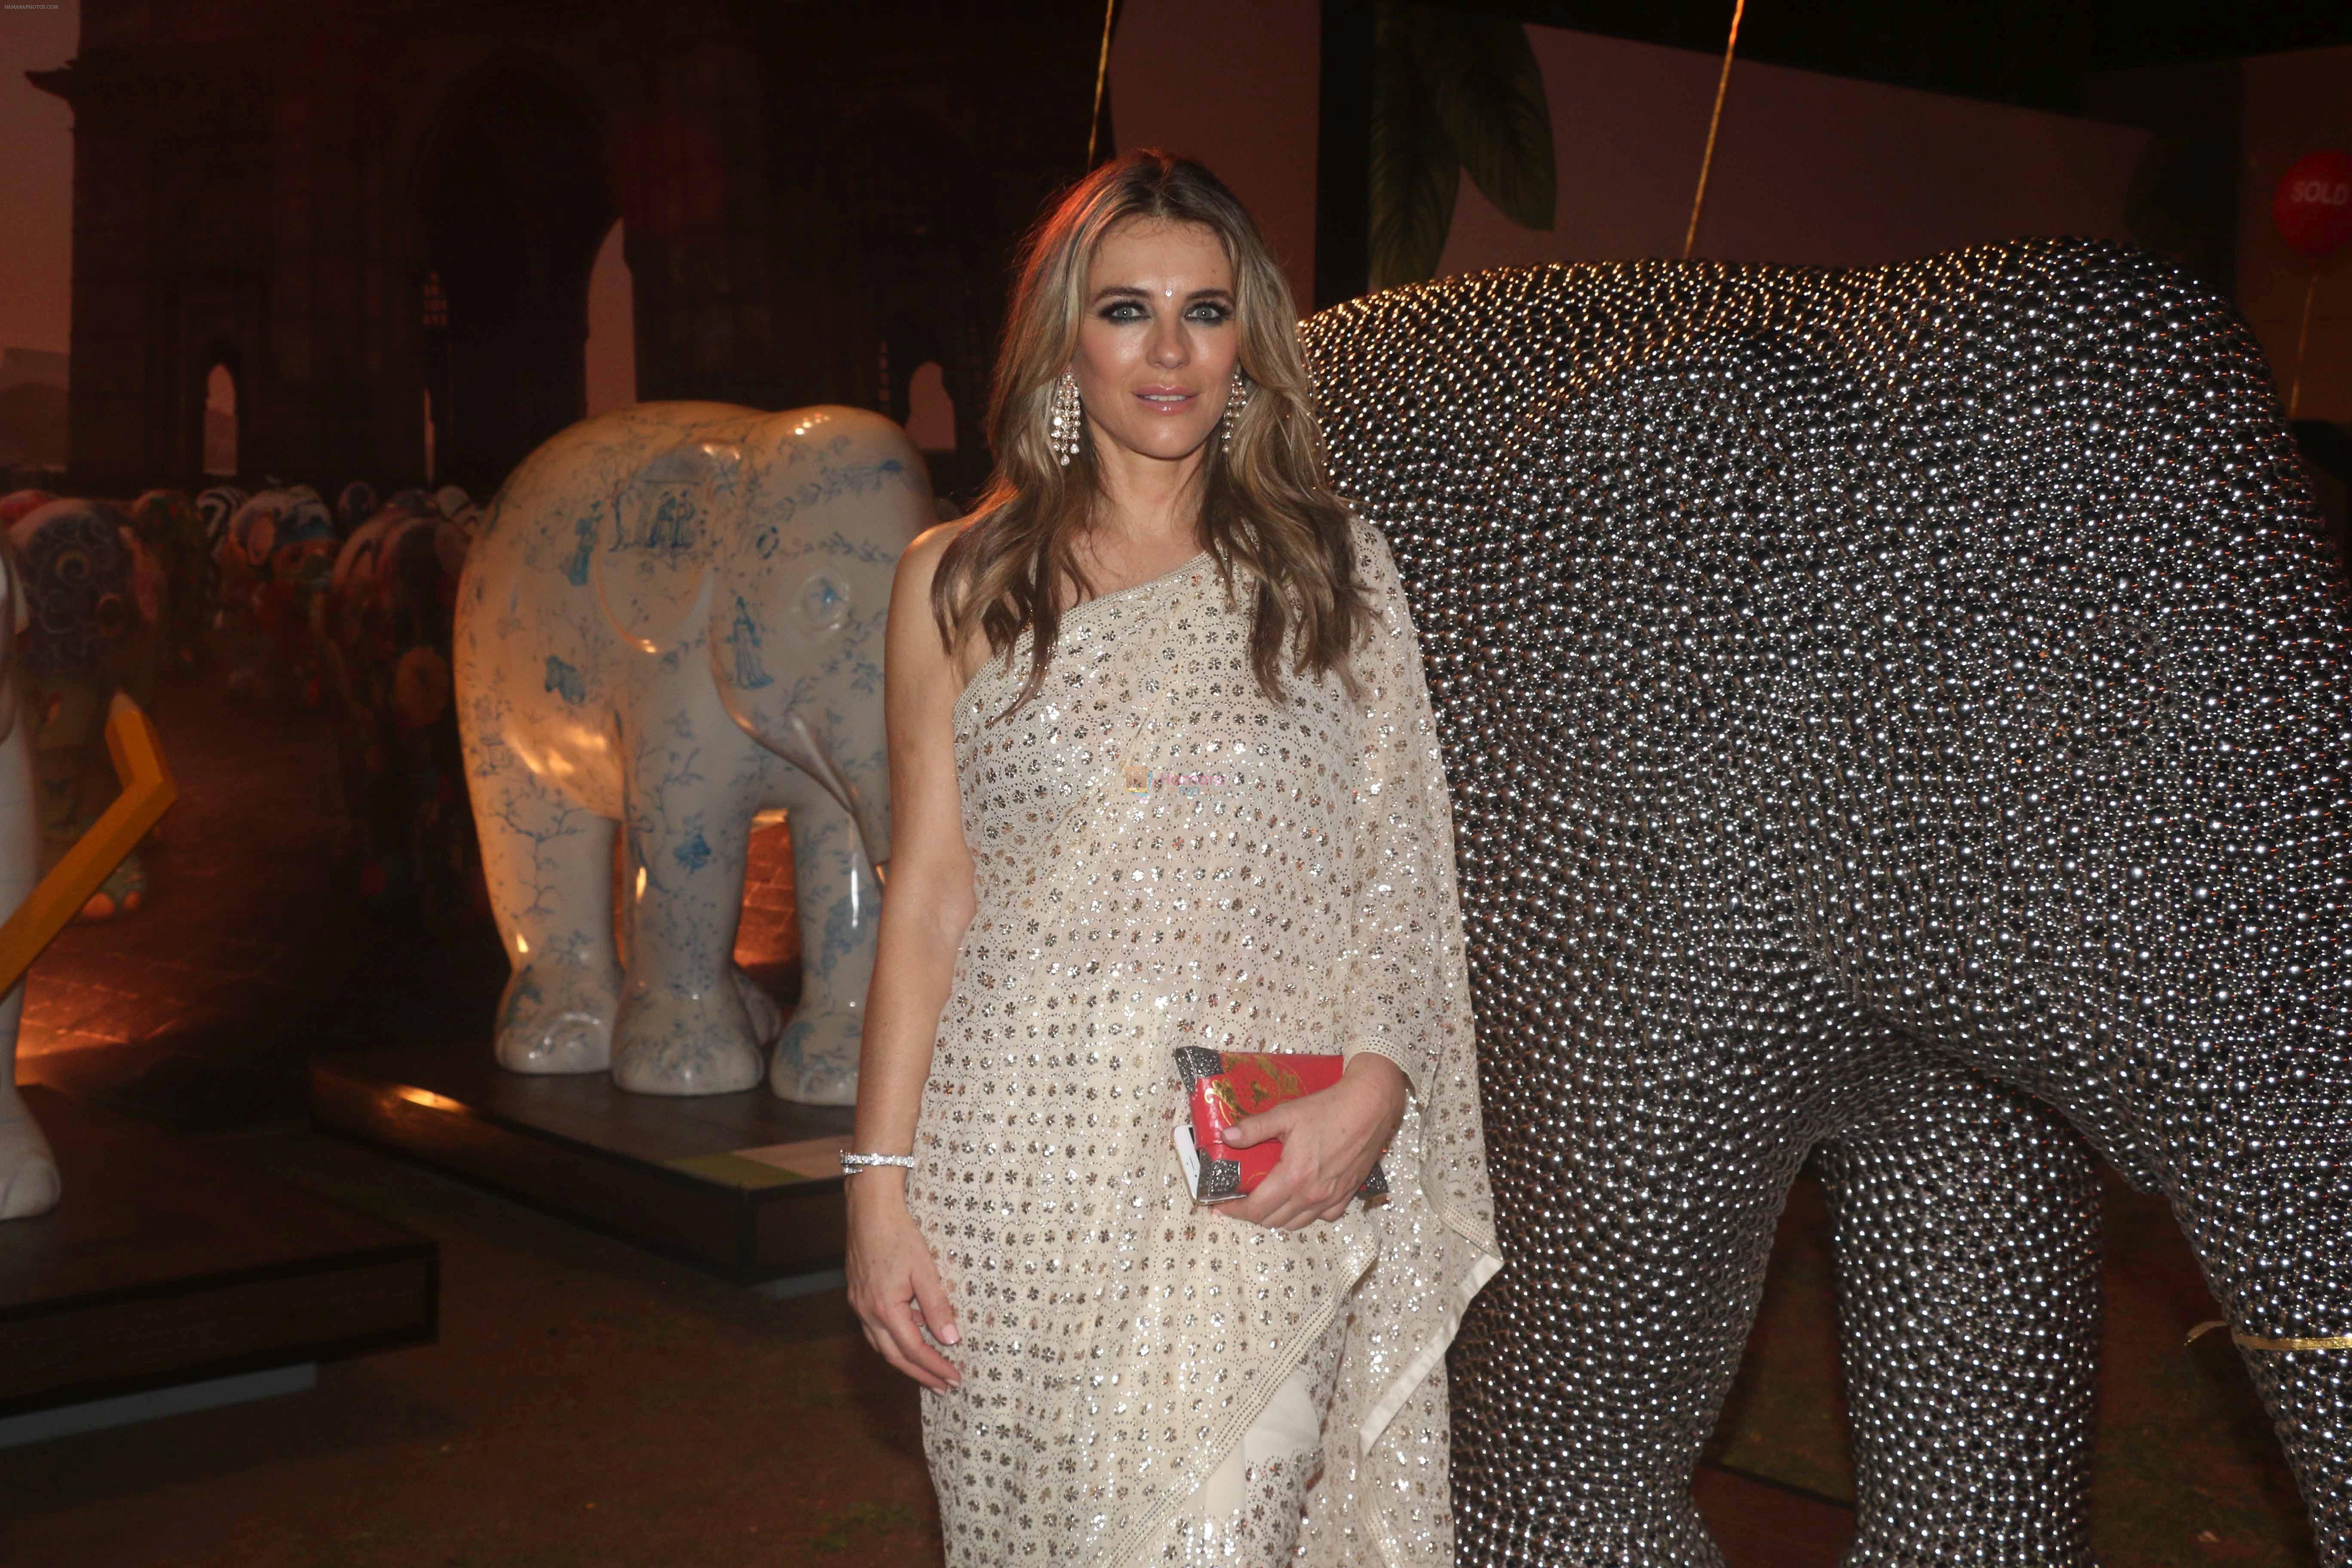 at the Finale of Elephant Parade in Taj Lands End, bandra on 23rd March 2018